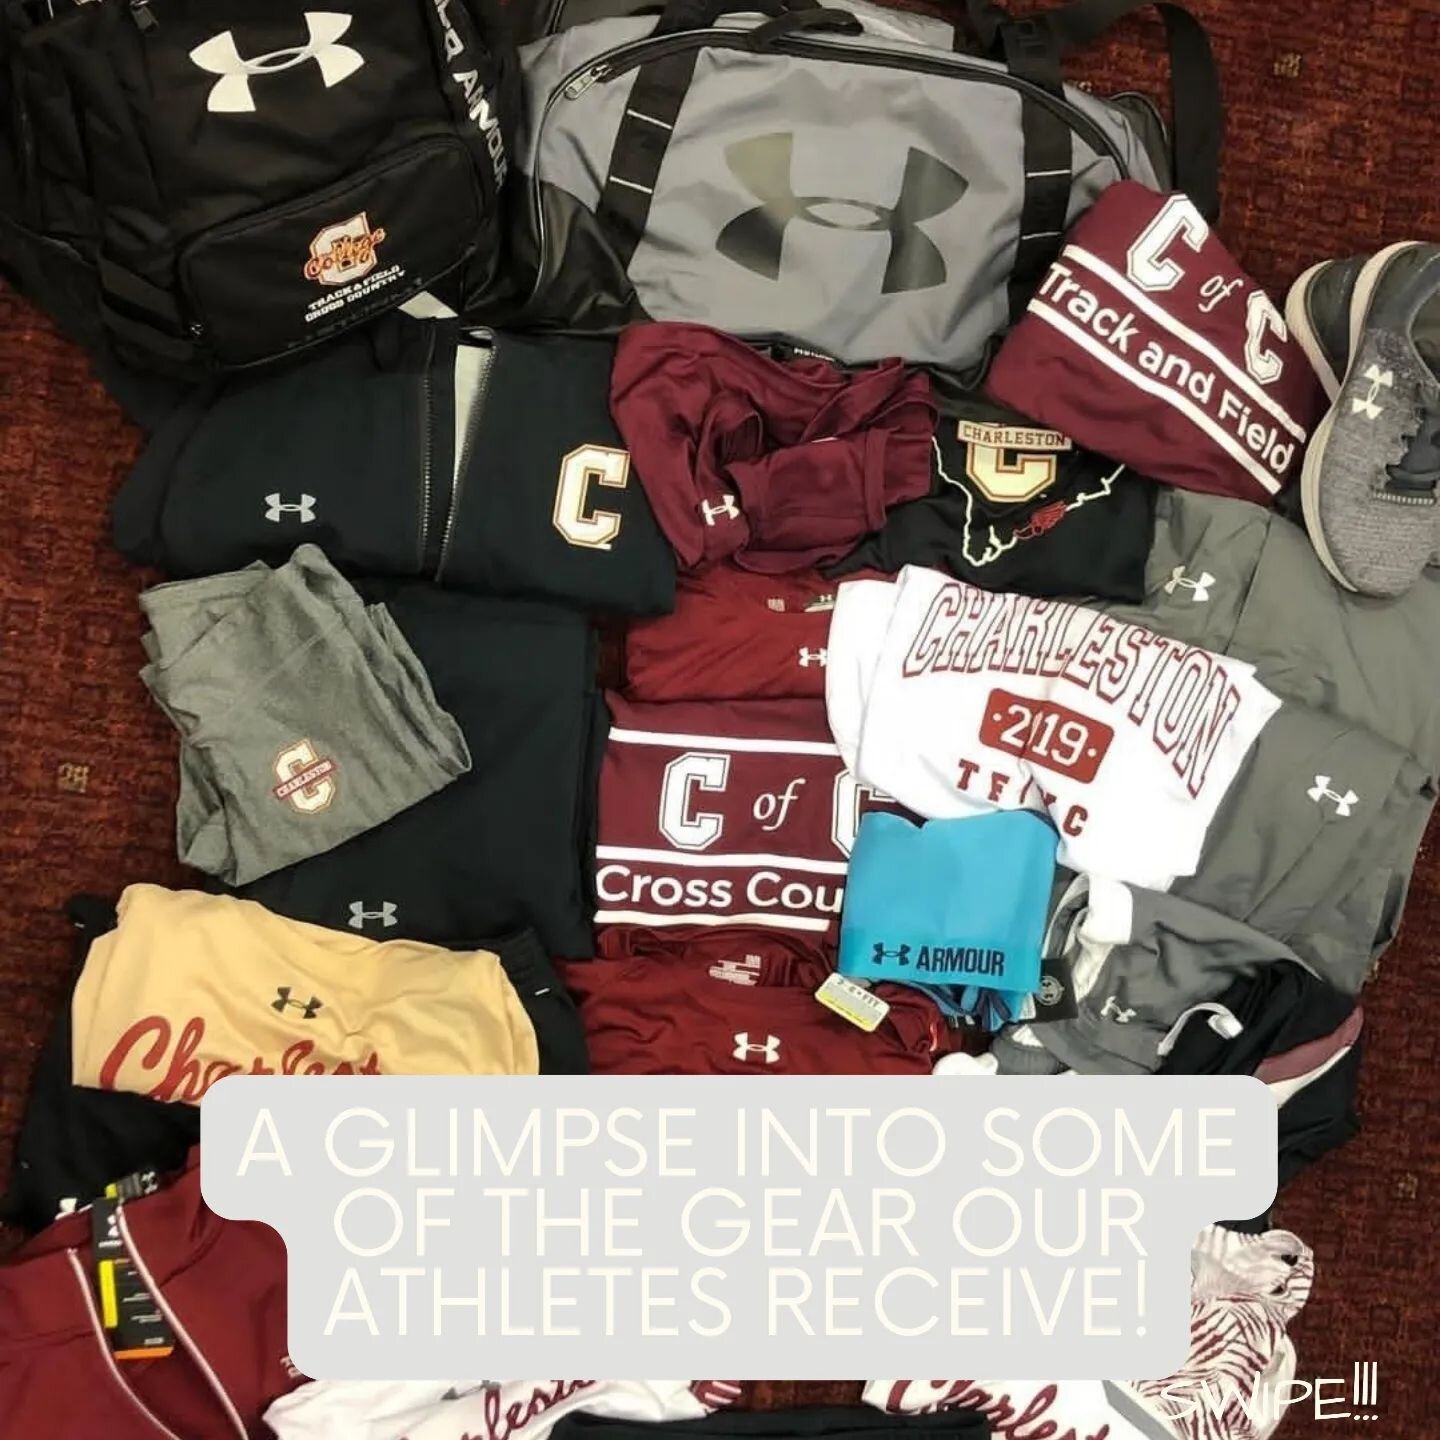 It's one of our most frequently asked questions, so we had some of our athletes send through photos of the gear they received this semester. Most athletes would agree that it's better than Christmas morning! 
.
.
.
.
.
#collegeathlete #studentathlete